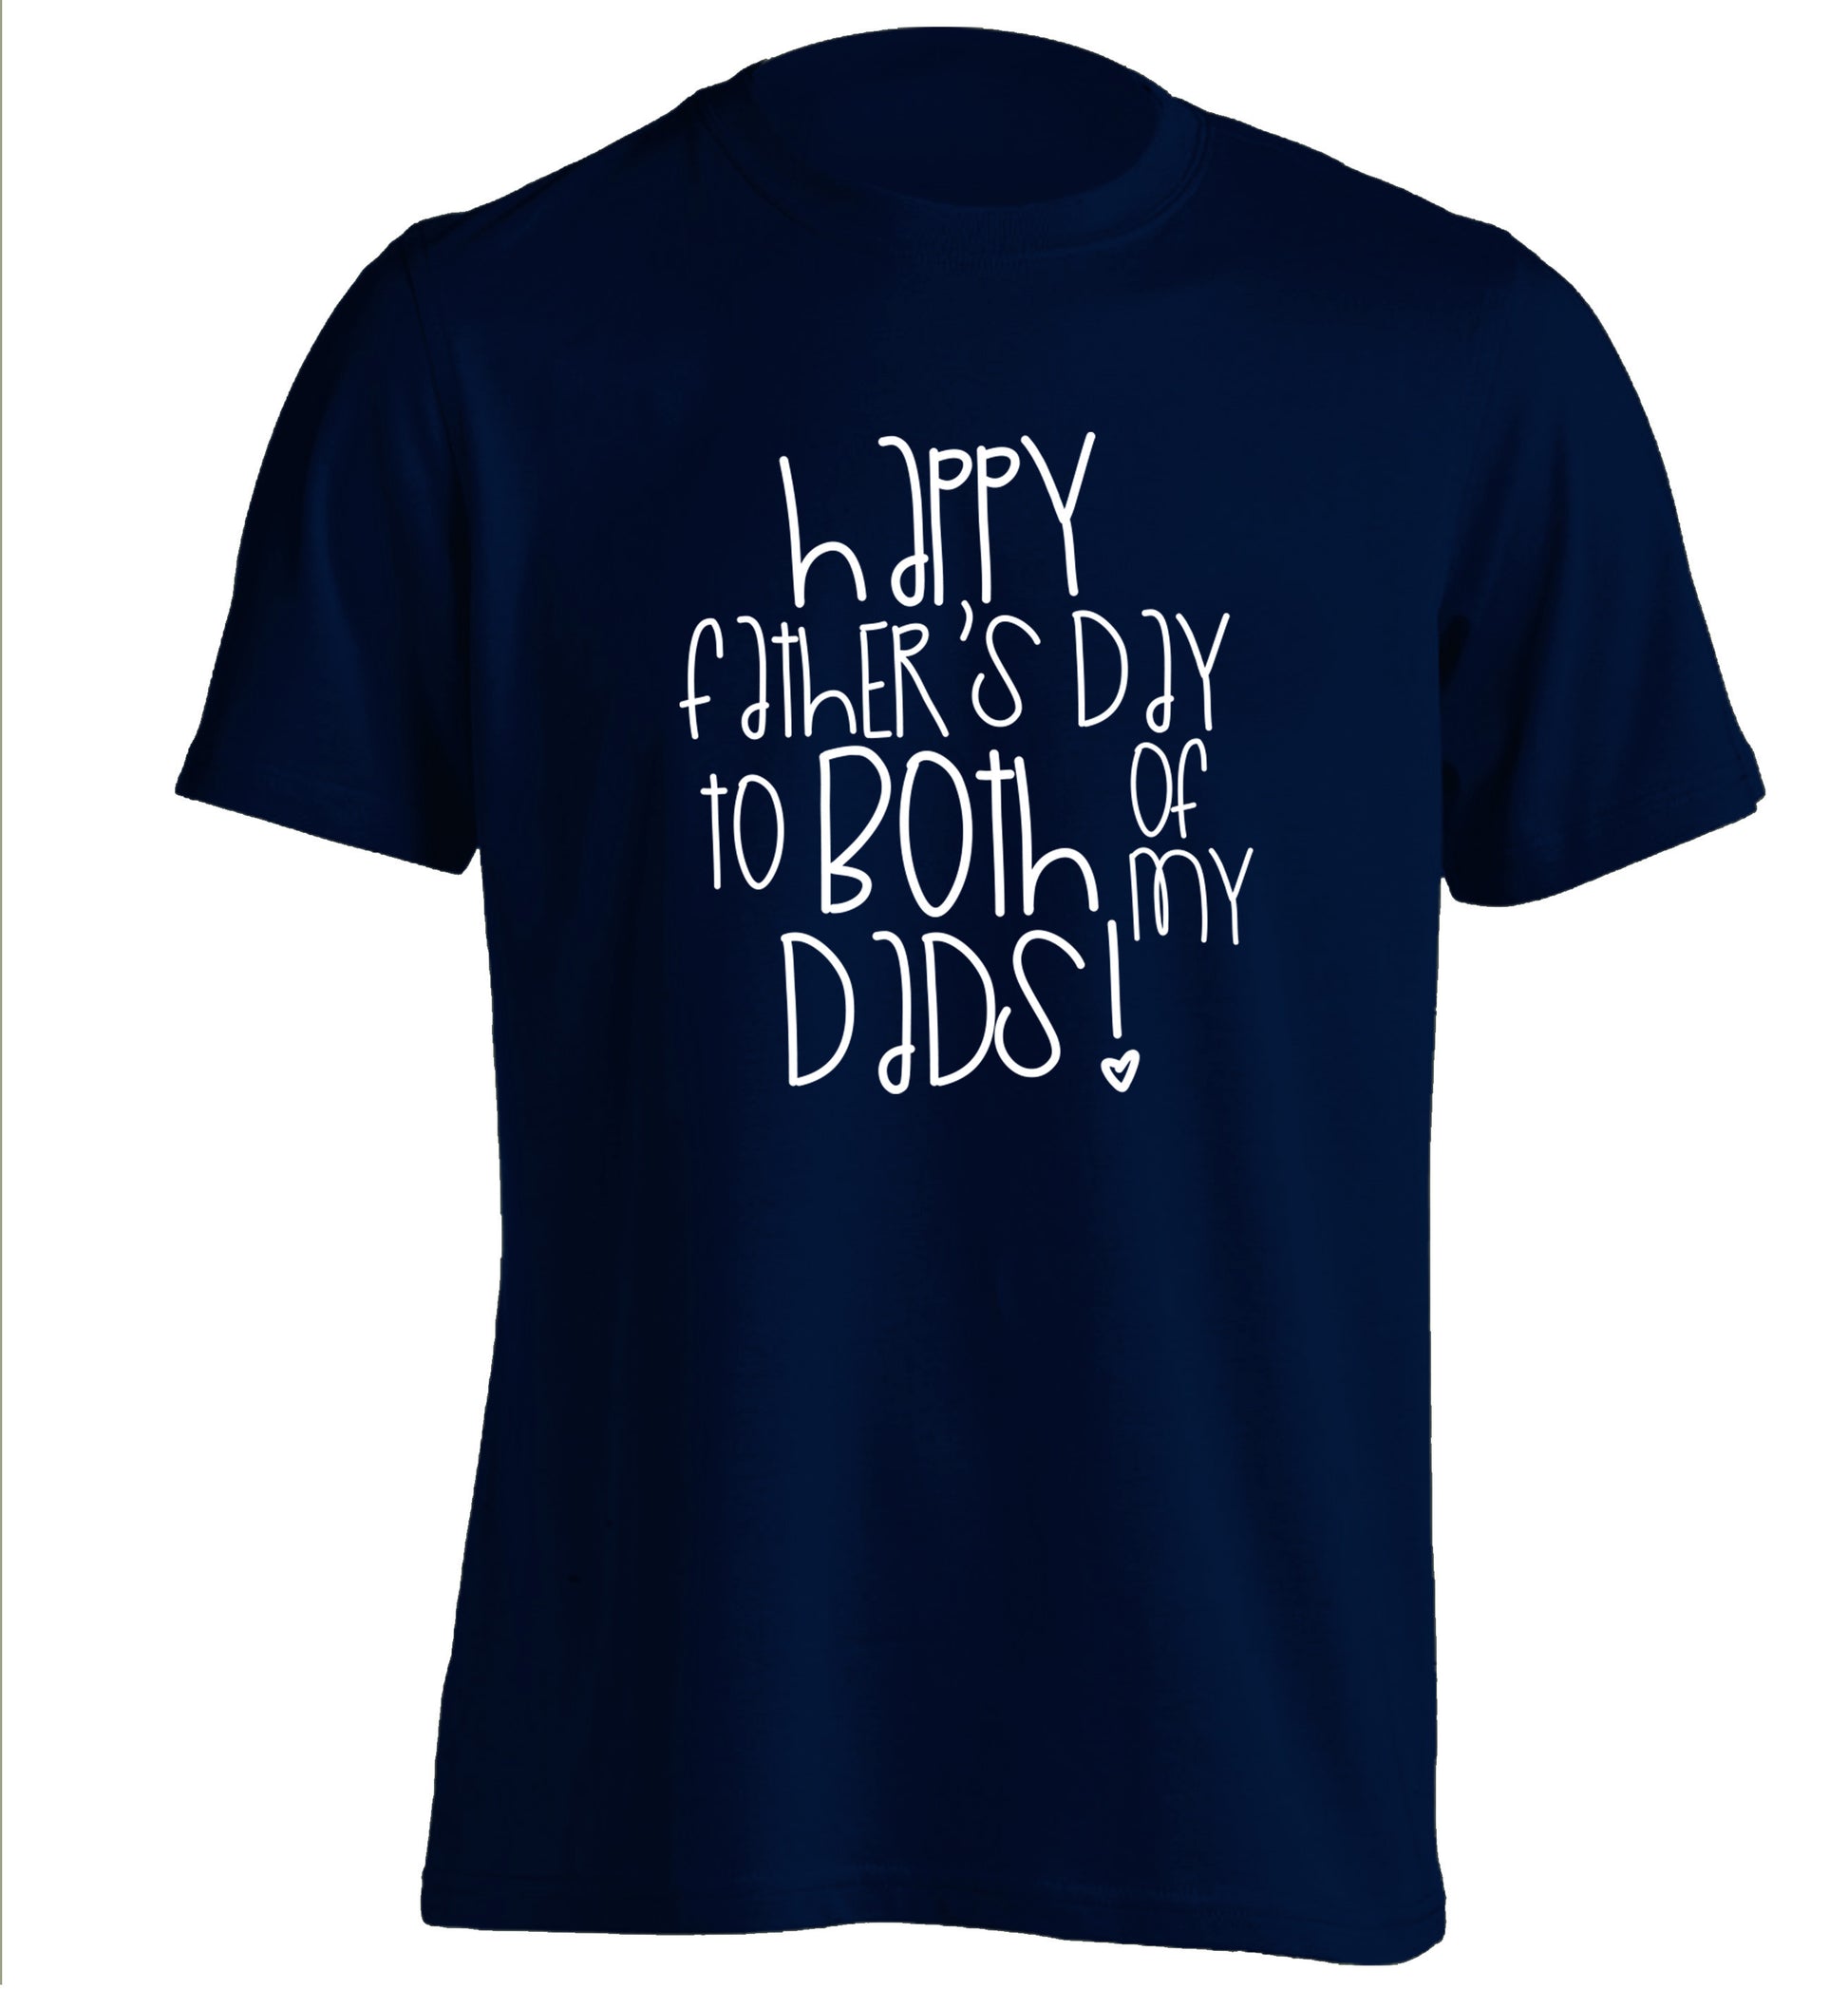 Happy father's day to both of my dads adults unisex navy Tshirt 2XL